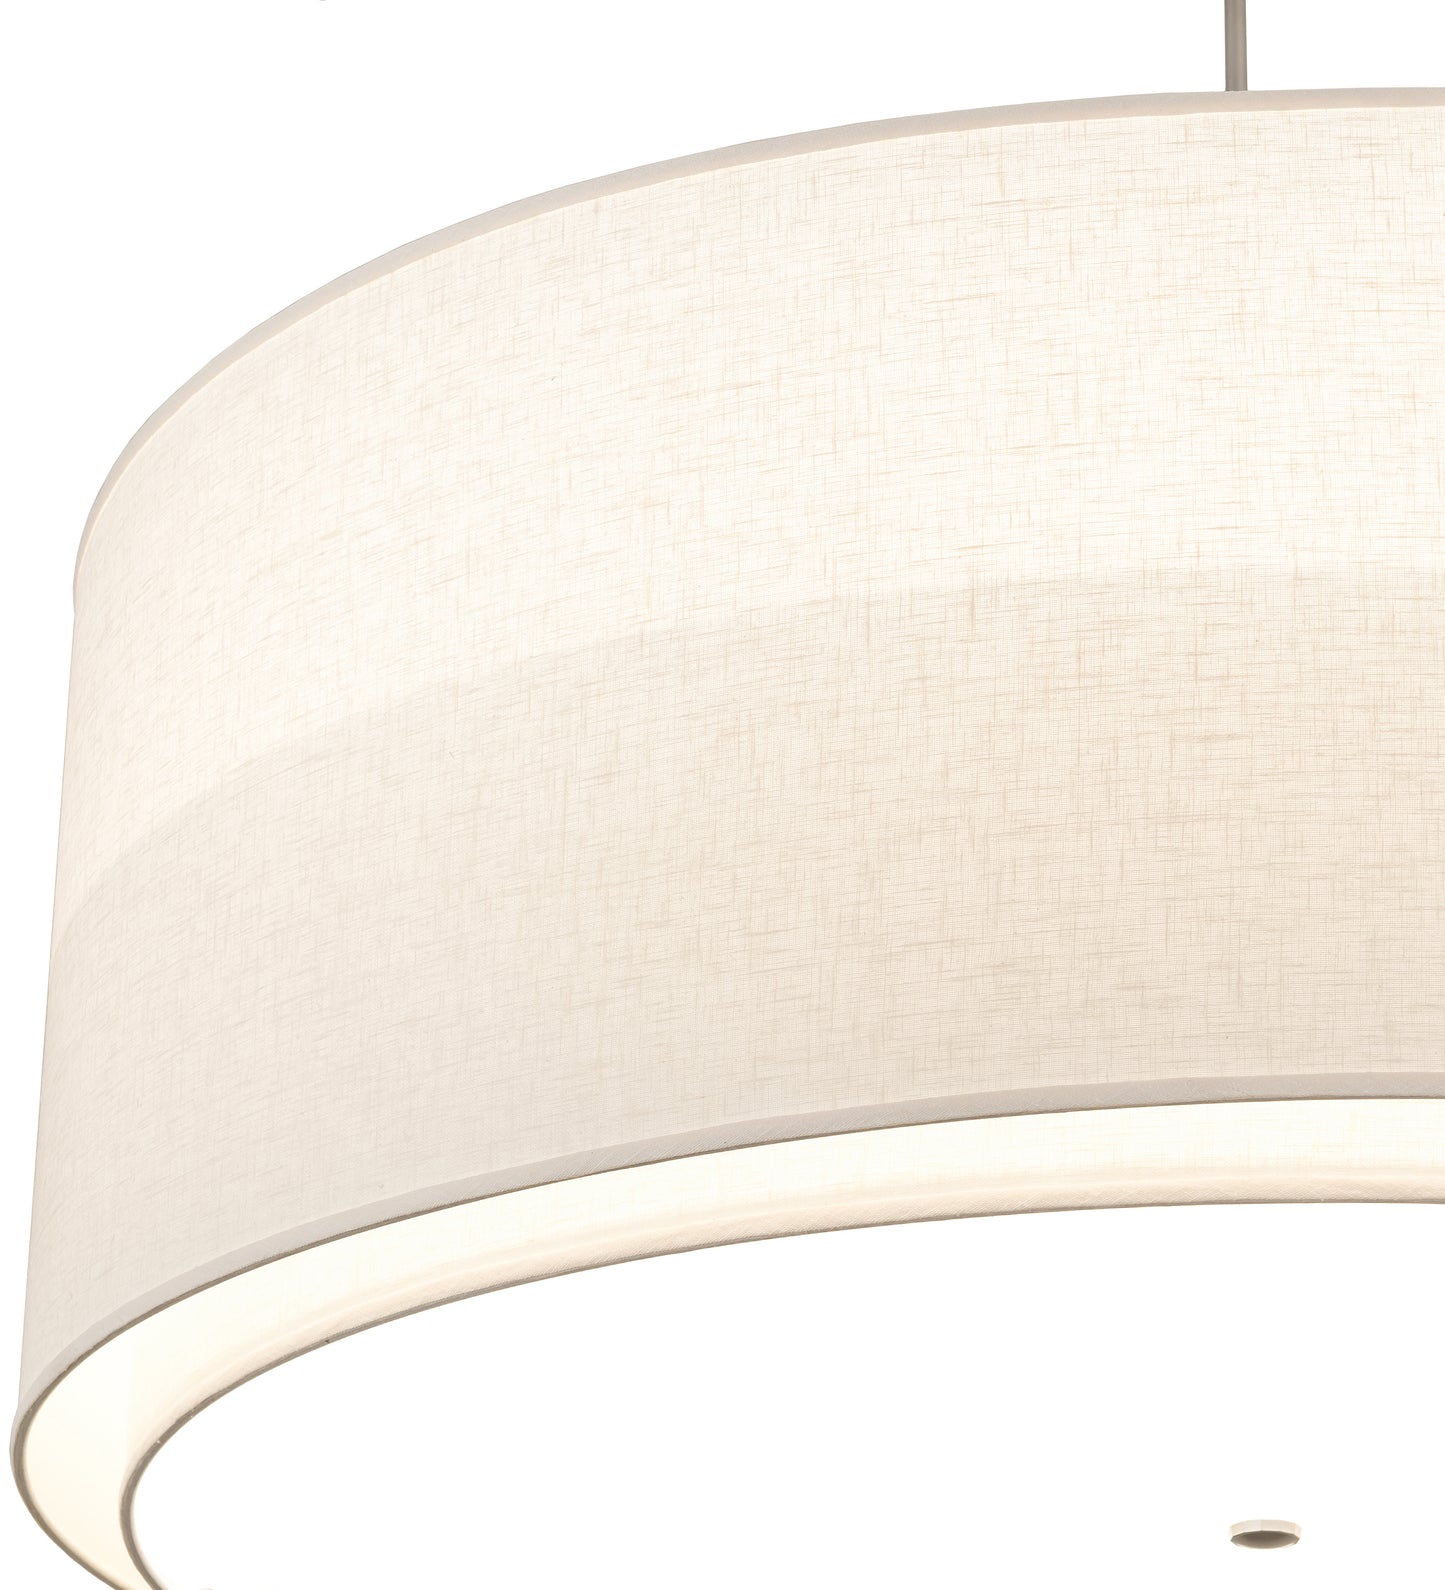 2nd Avenue 48" Cilindro Textrene 2 Tier Pendant